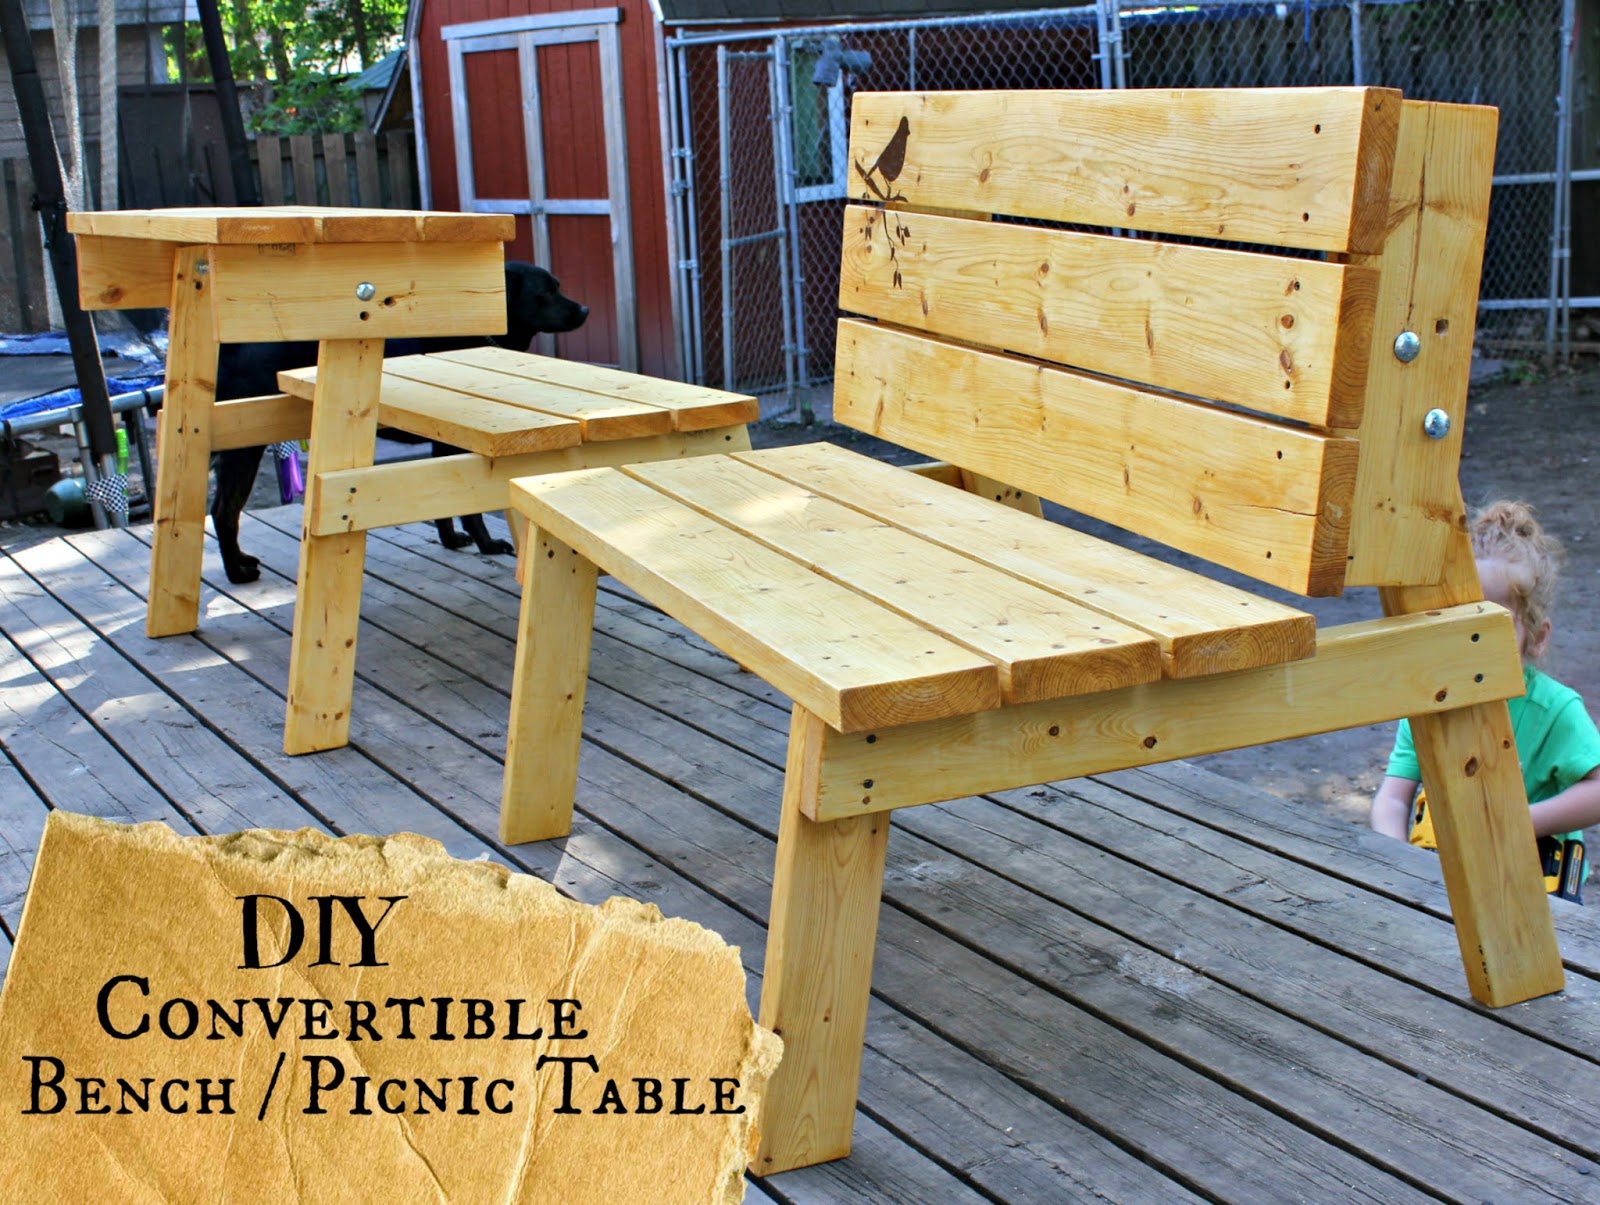 The Good Kind of Crazy: Convertible Bench/Picnic Table you can make